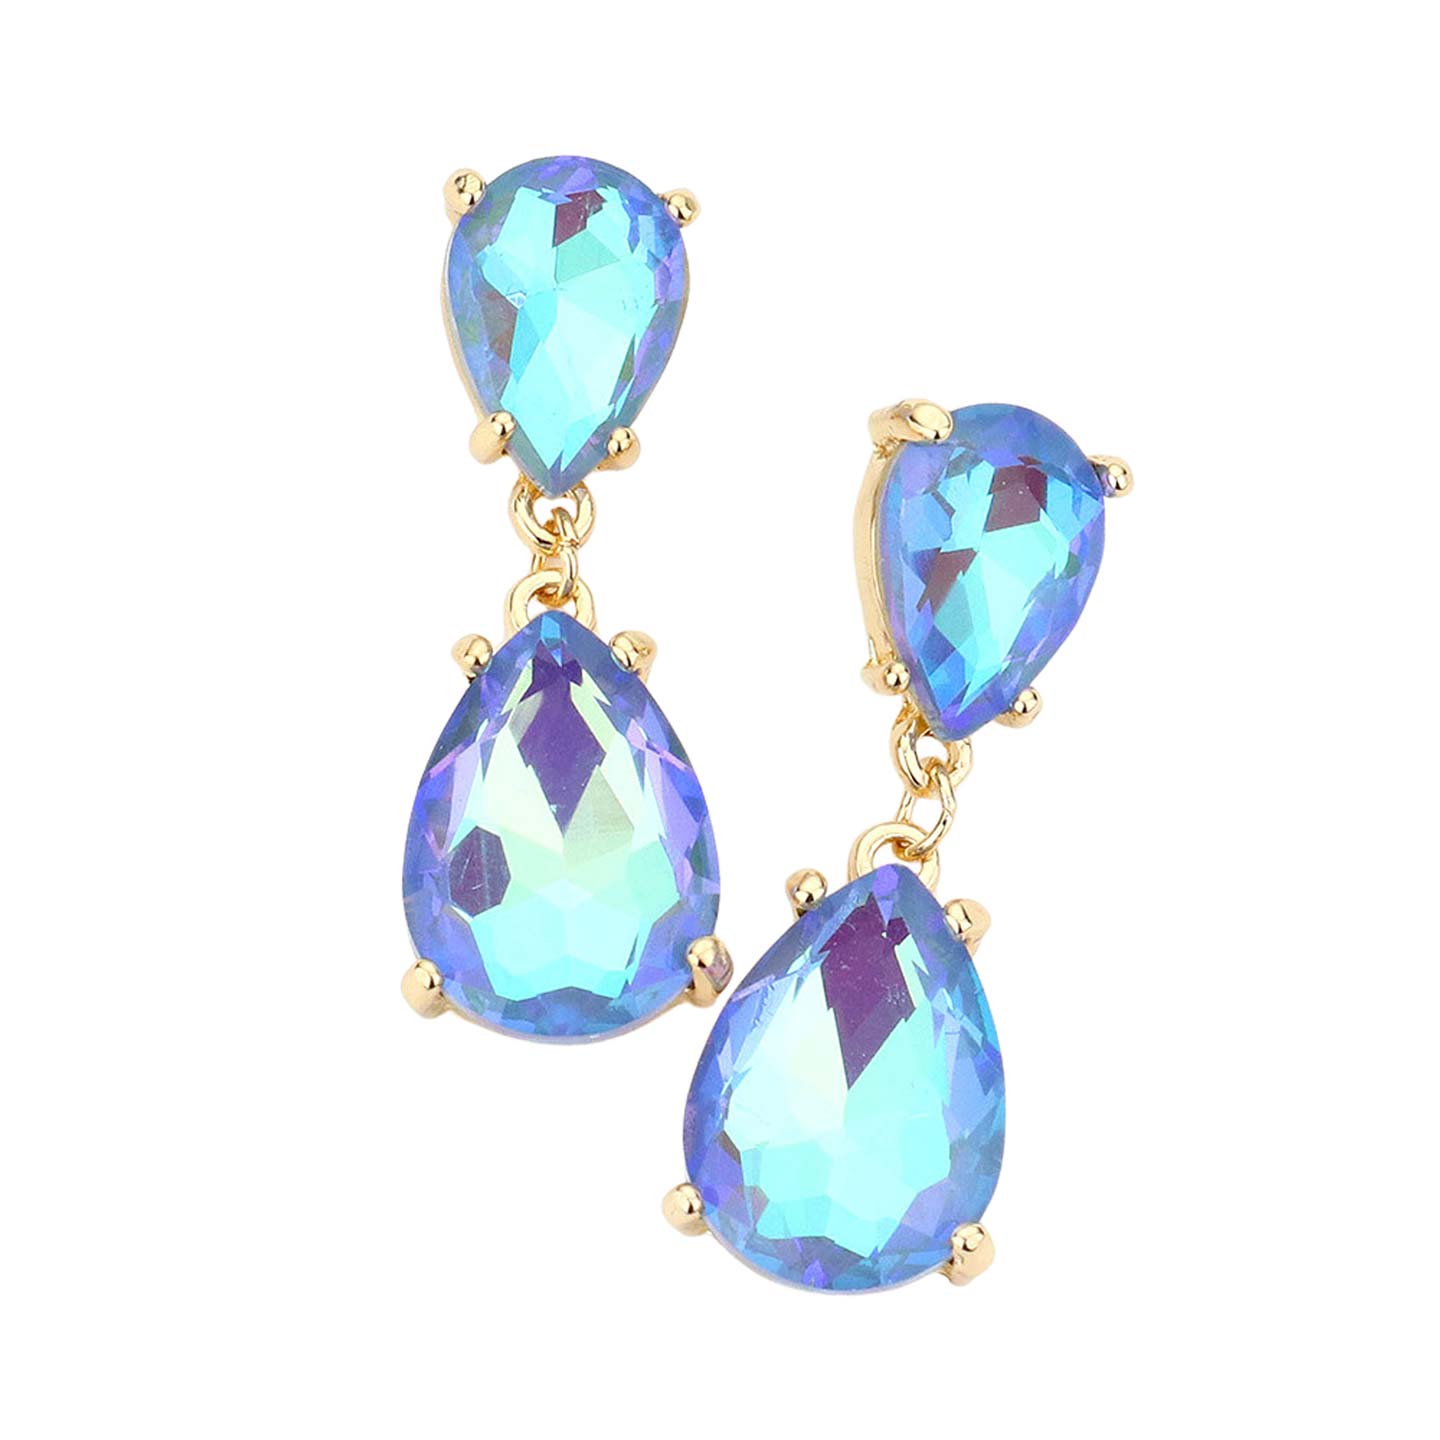 Aqua Double Teardrop Link Dangle Evening Earrings, Beautiful teardrop-shaped dangle drop earrings. These elegant, comfortable earrings can be worn all day to dress up any outfit. Wear a pop of shine to complete your ensemble with a classy style. The perfect accessory for adding just the right amount of shimmer and a touch of class to special events. Jewelry that fits your lifestyle and makes your moments awesome!